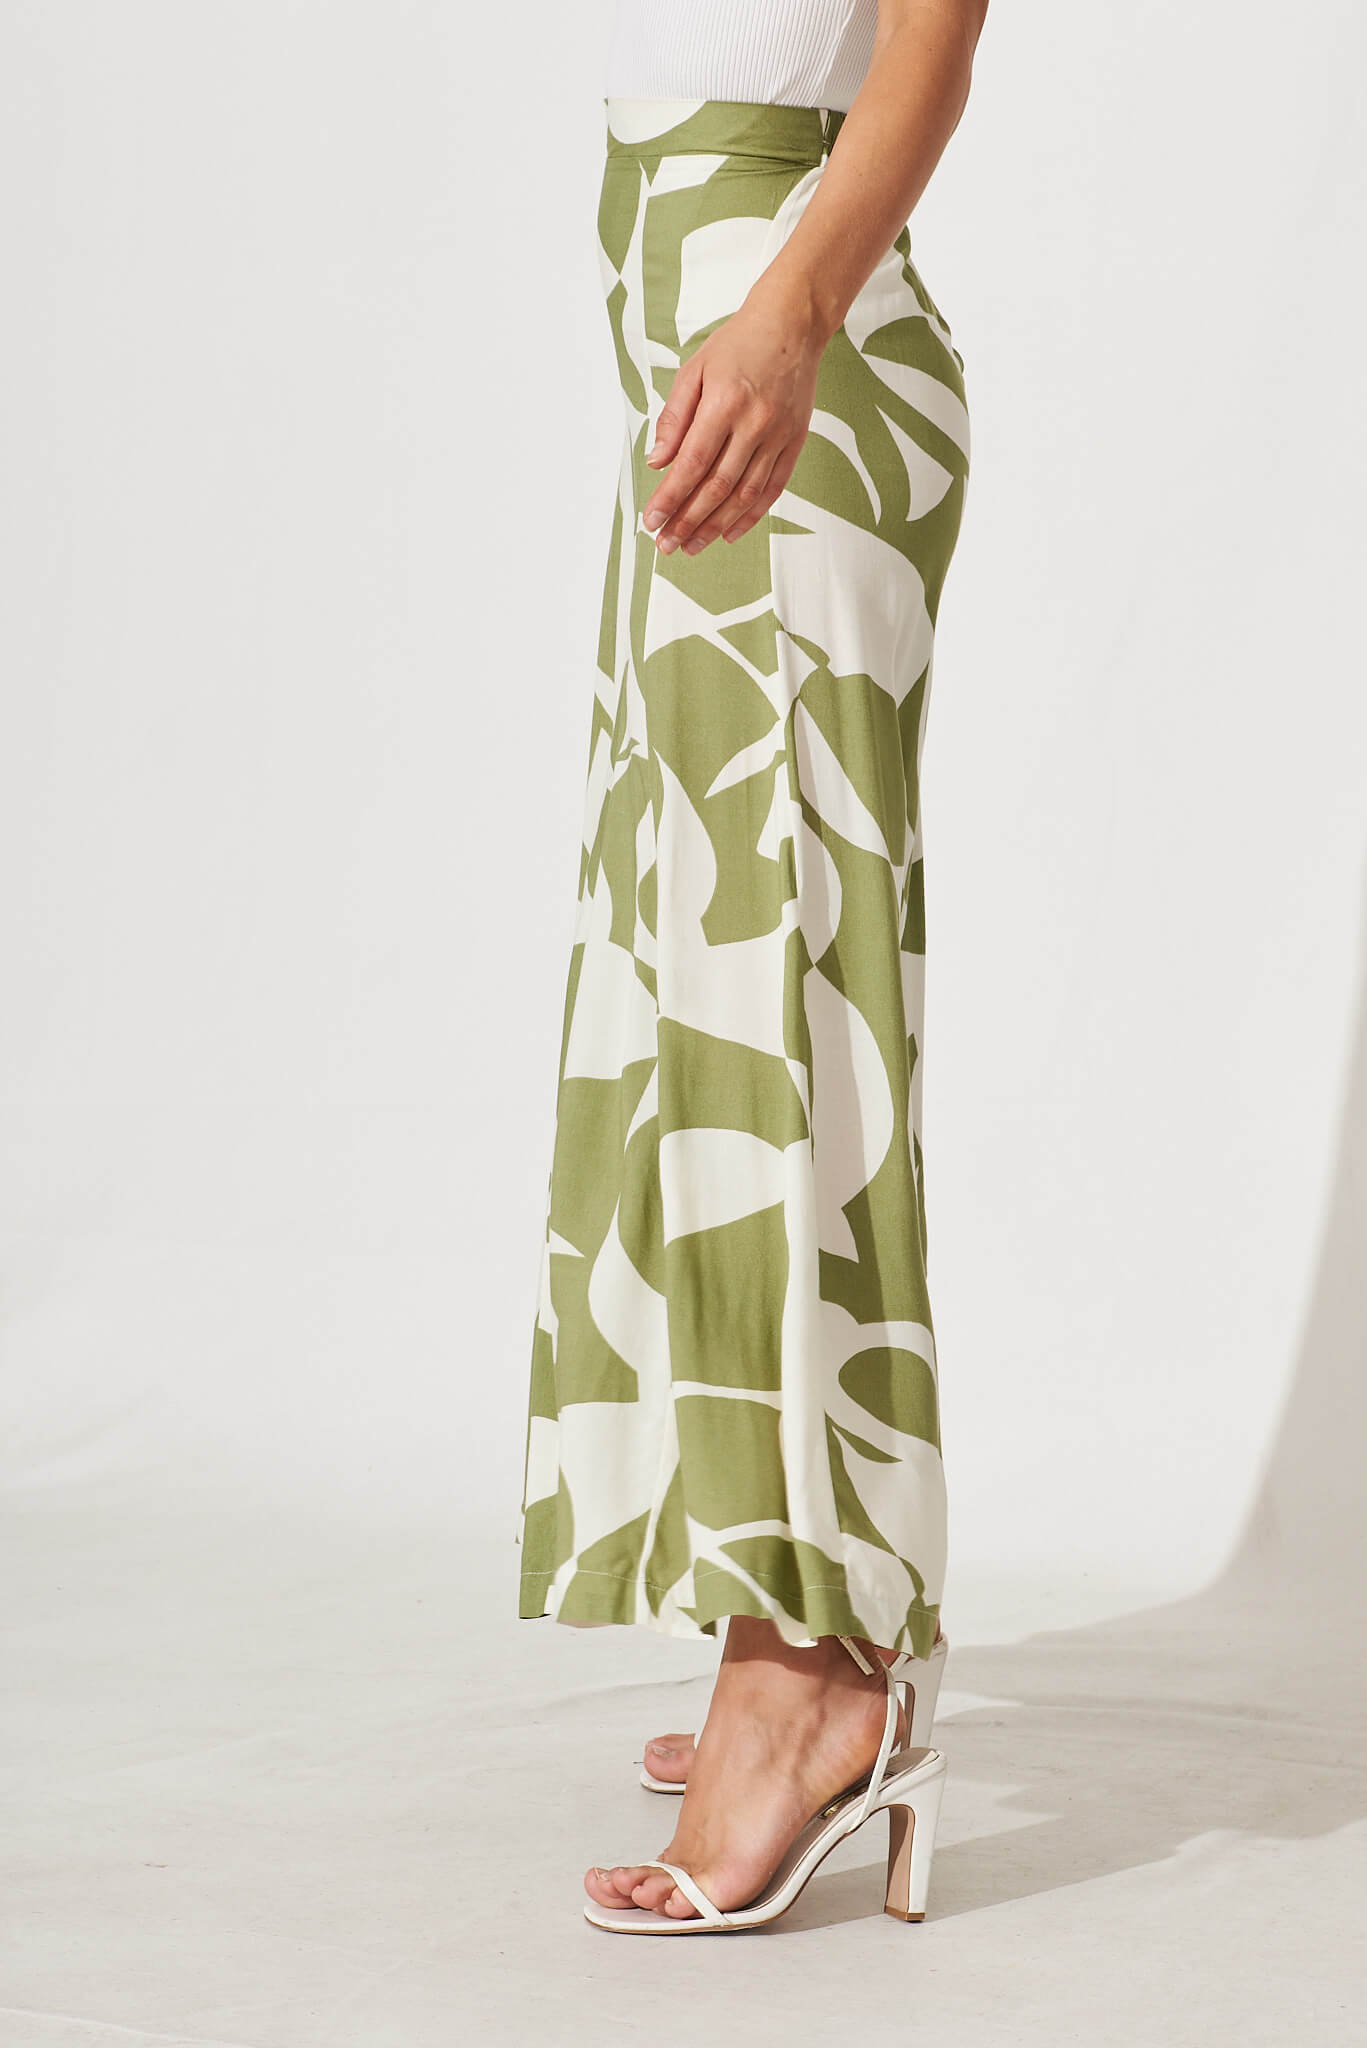 Effenty Pants In Olive And Cream Geometric Print – St Frock